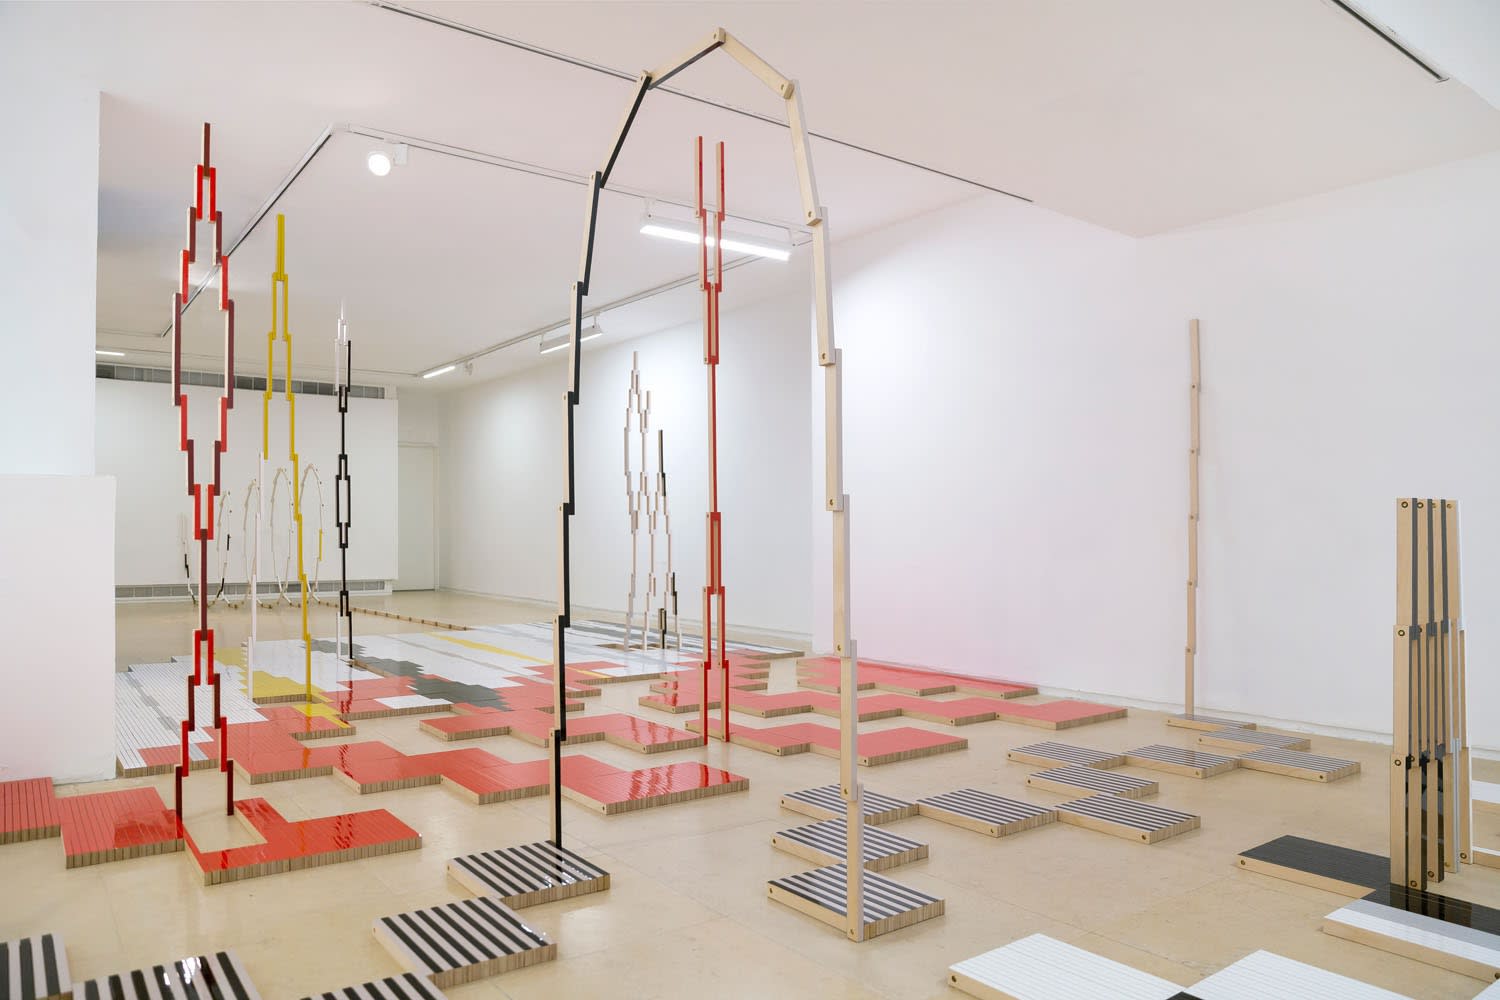 Installation view of Reuven Israel's exhibition at Center for Contemporary Art Tel Aviv